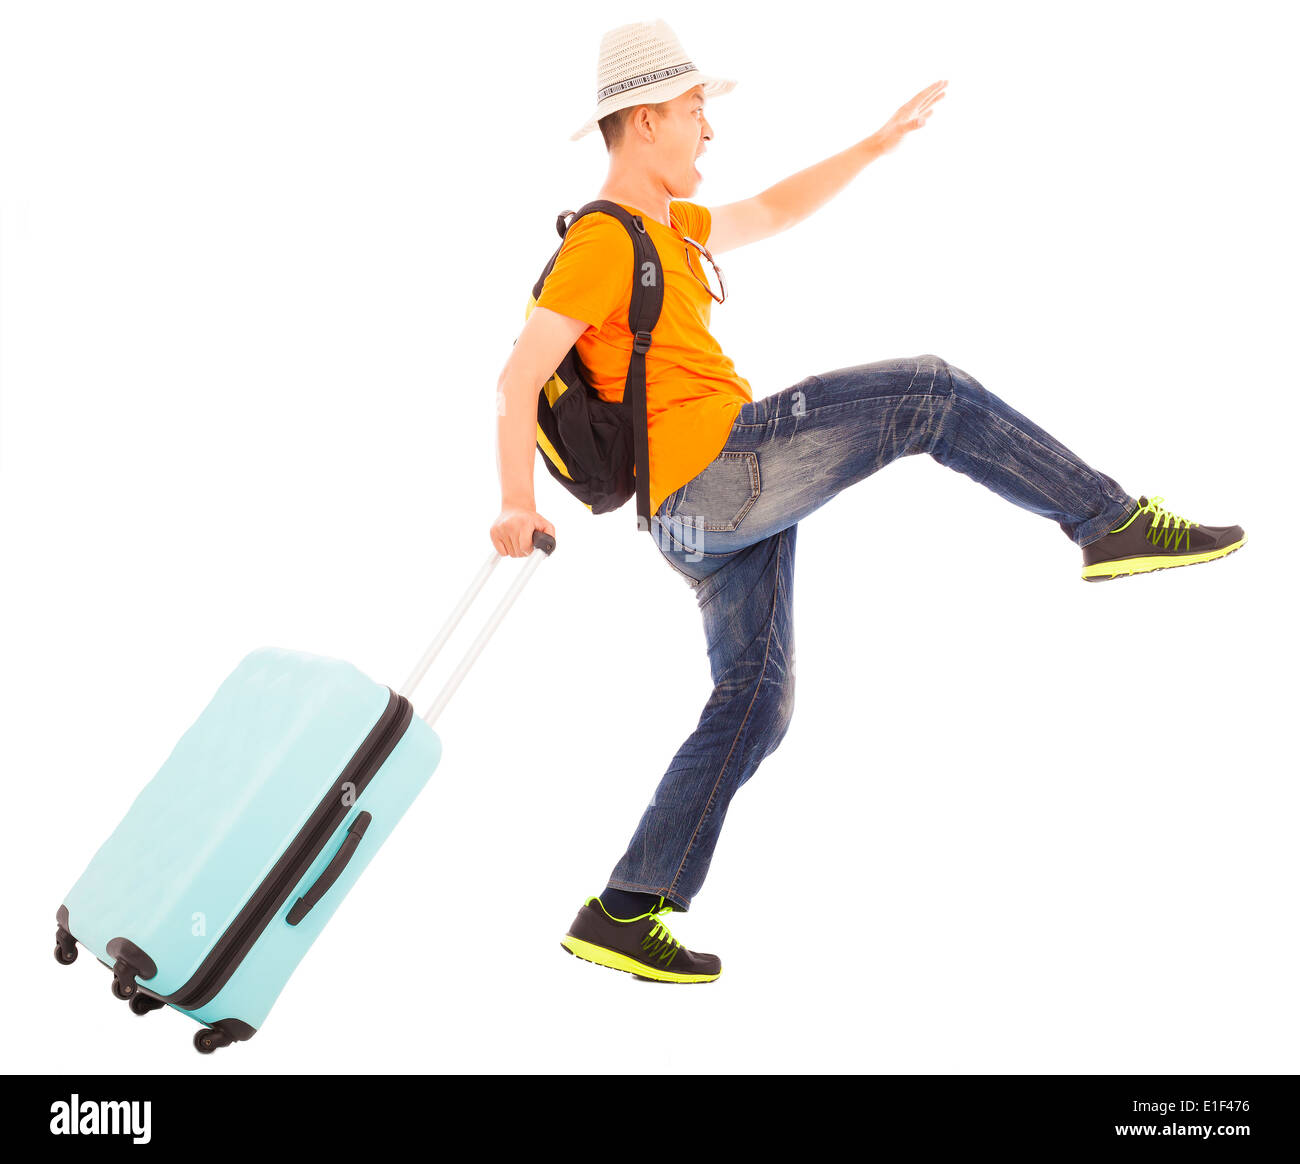 young backpacker making a funny walking pose Stock Photo